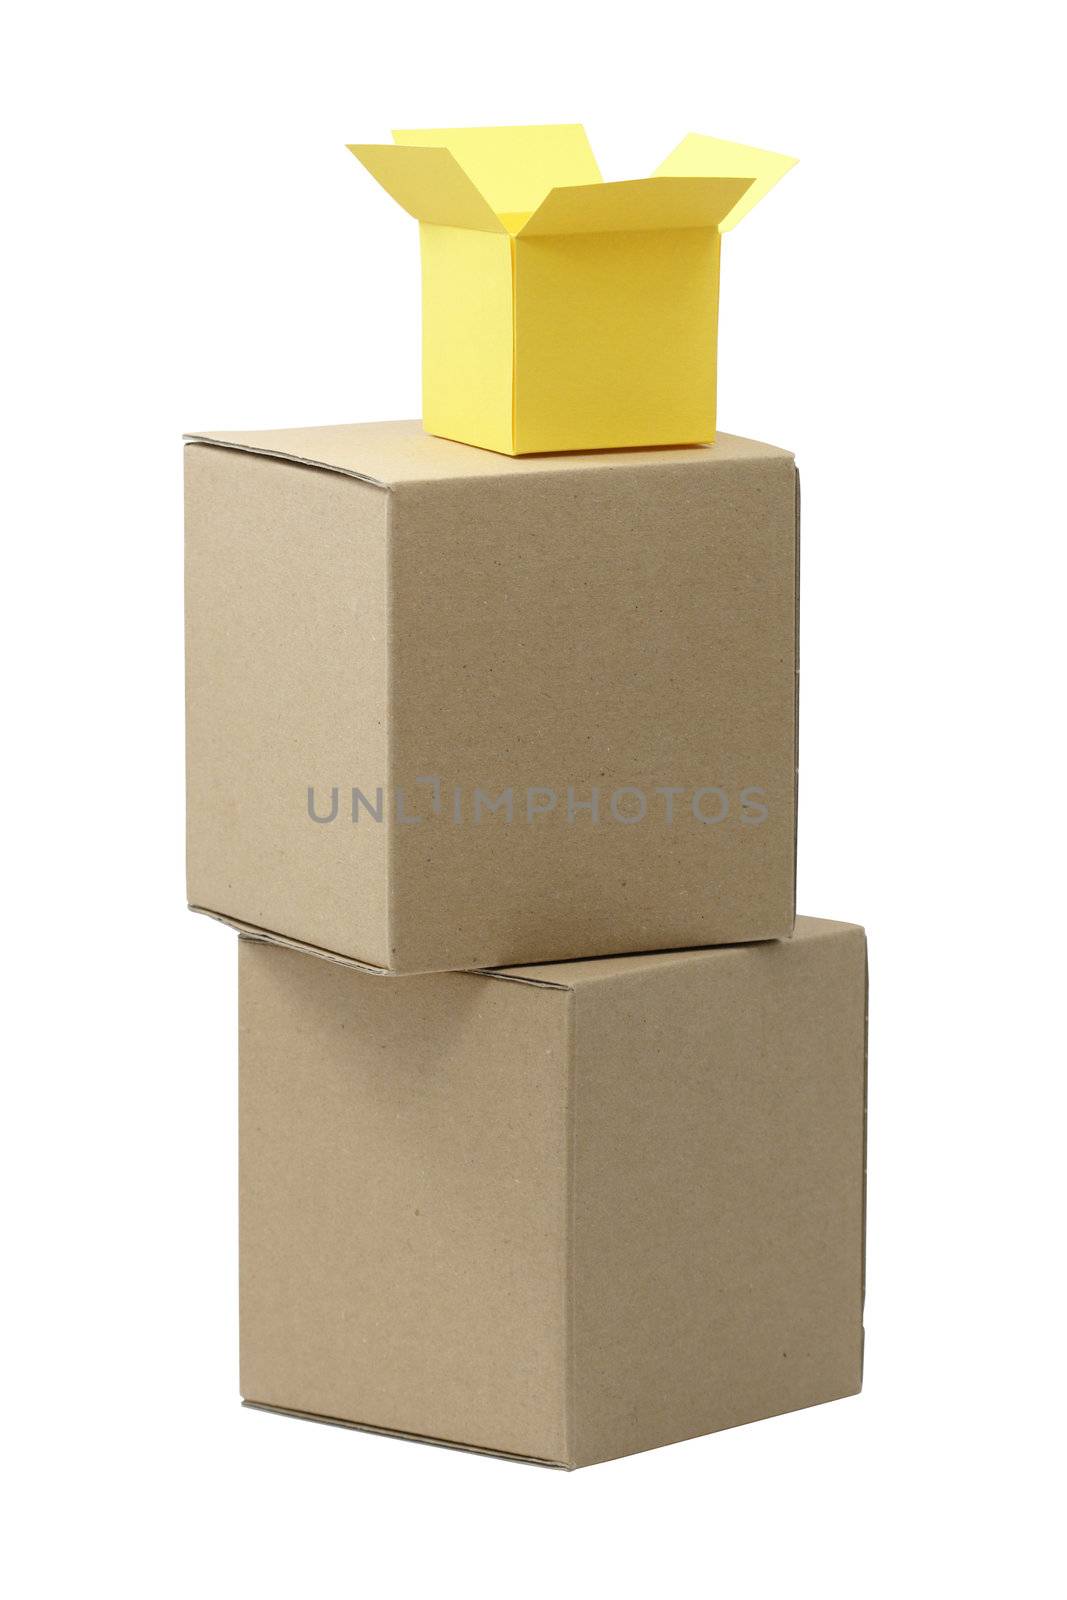 One small open box standing on two big carton boxes. Isolated on white with clipping path